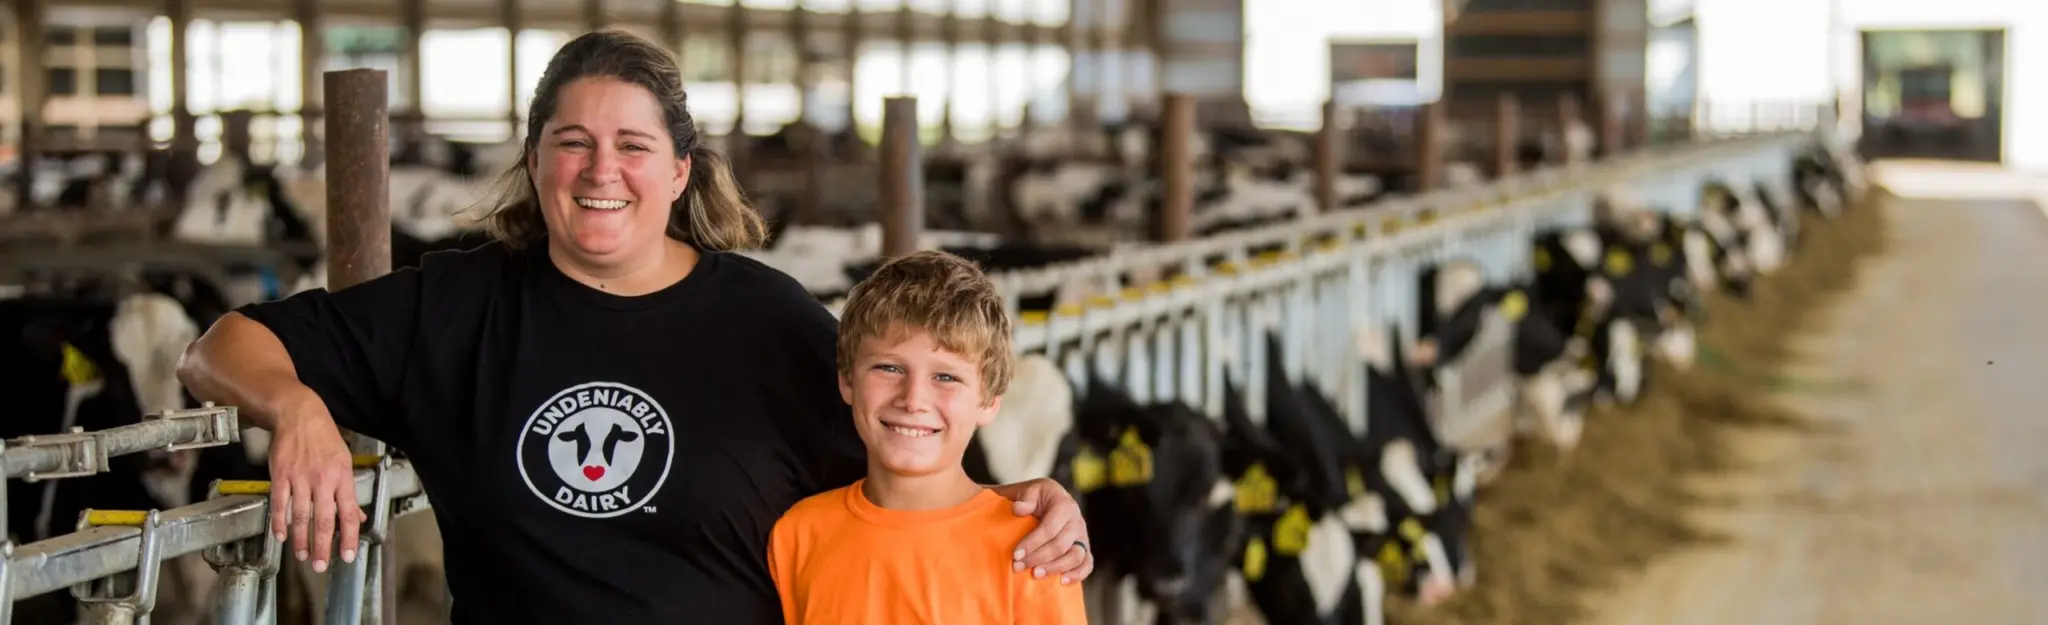 Dairy farmer and her son in a barn, with cows in the background.